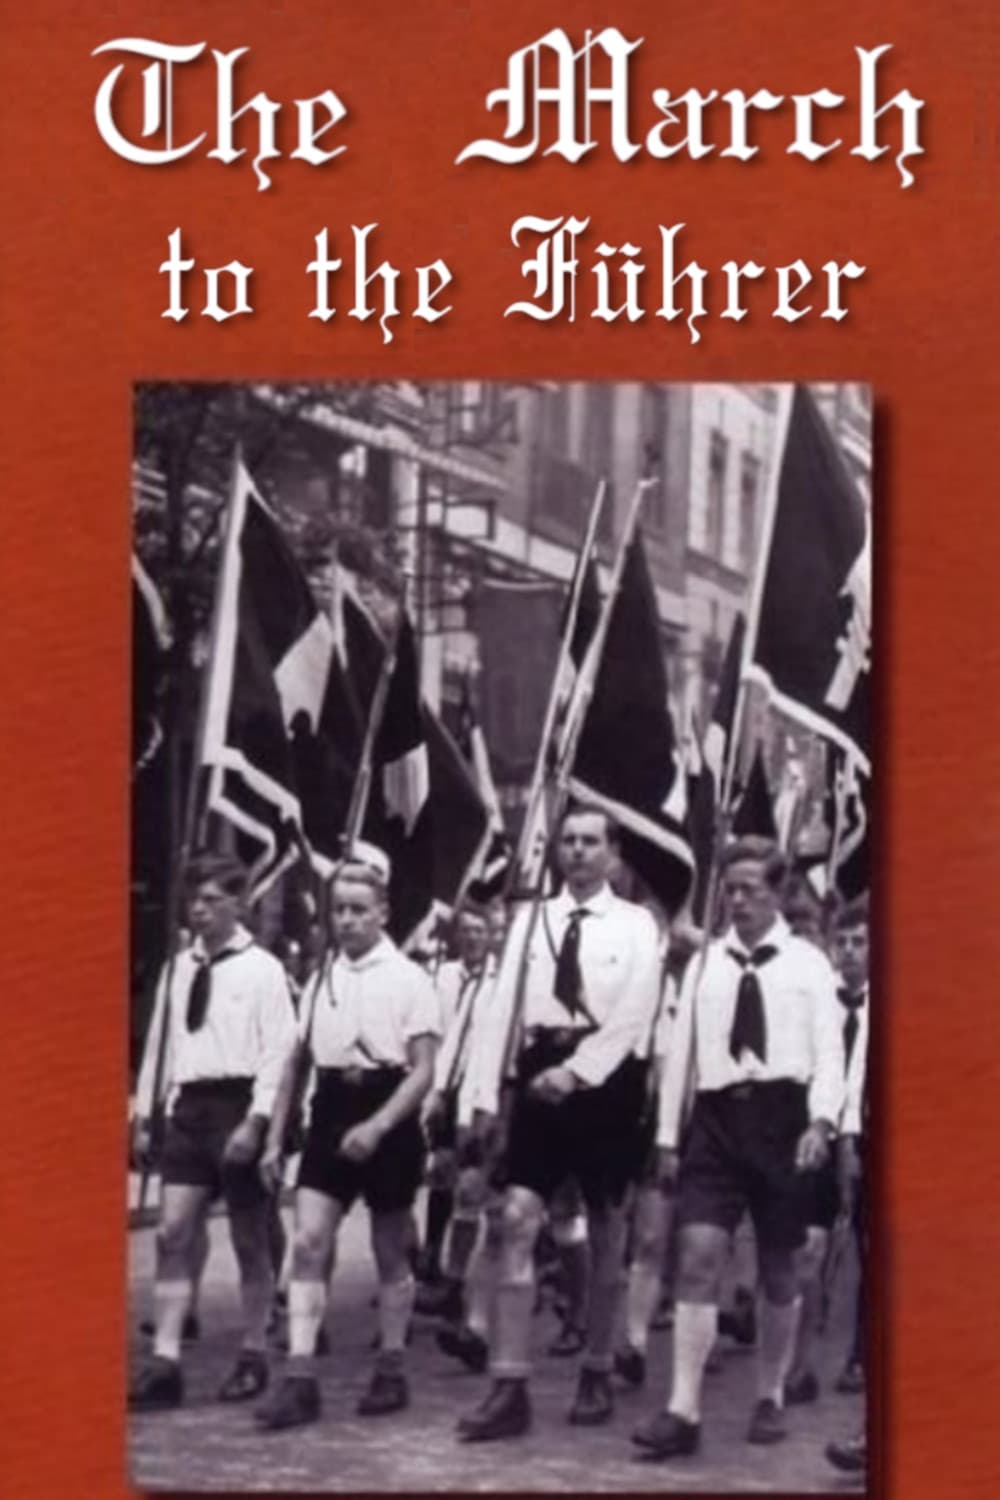 The March to the Führer